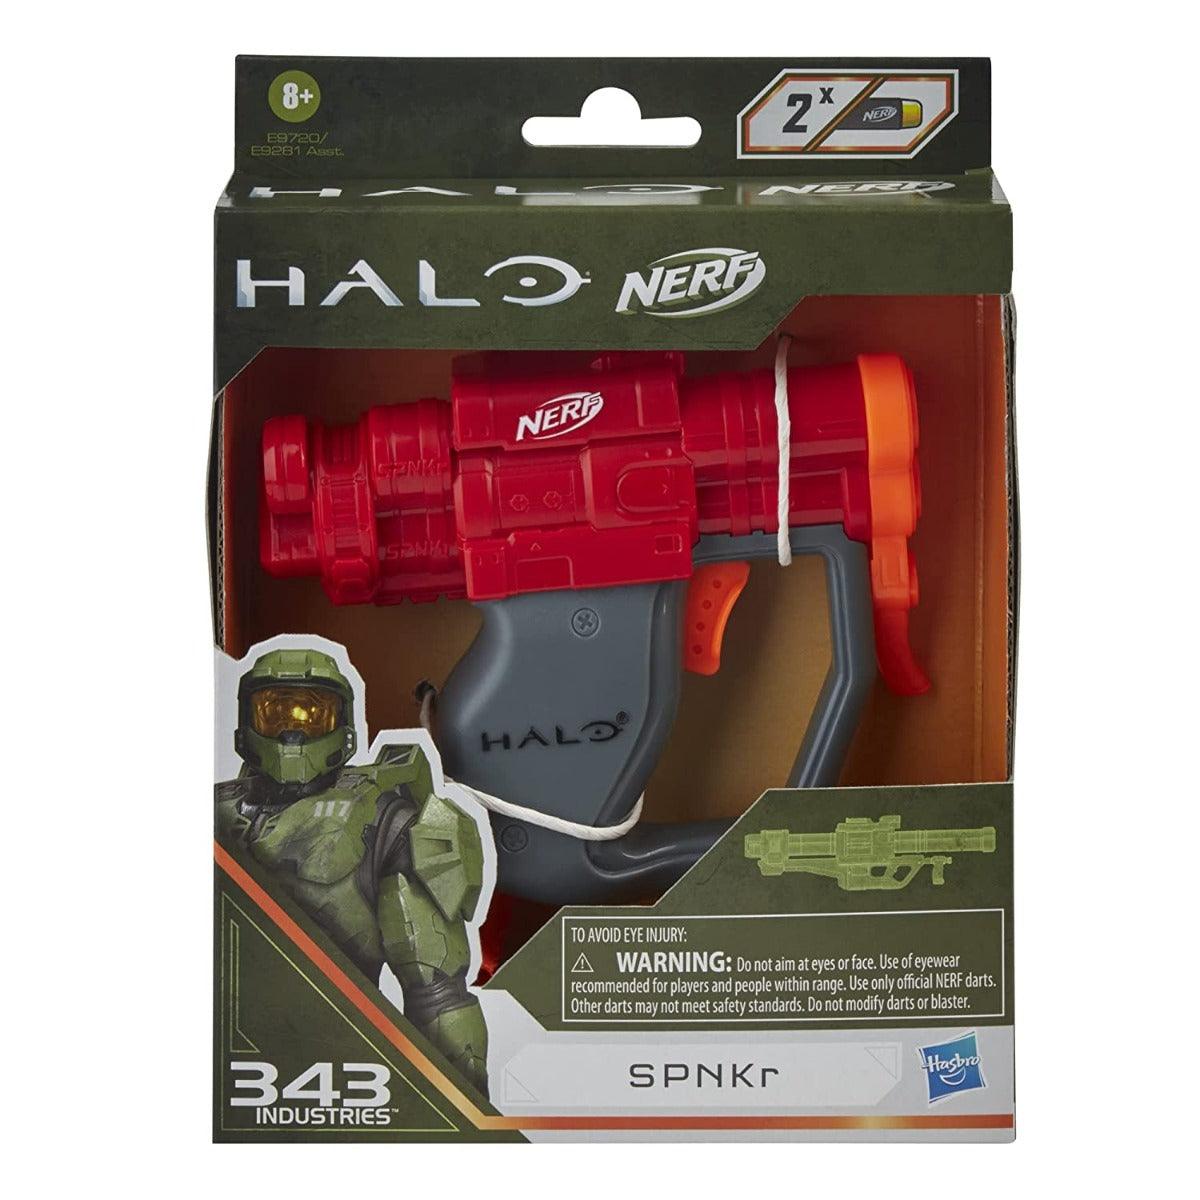 Nerf MicroShots Halo SPNKR,Mini Dart-Firing Blaster and 2 Nerf Darts,Collectible Blaster for Halo Video Game Fans and Nerf Battlers